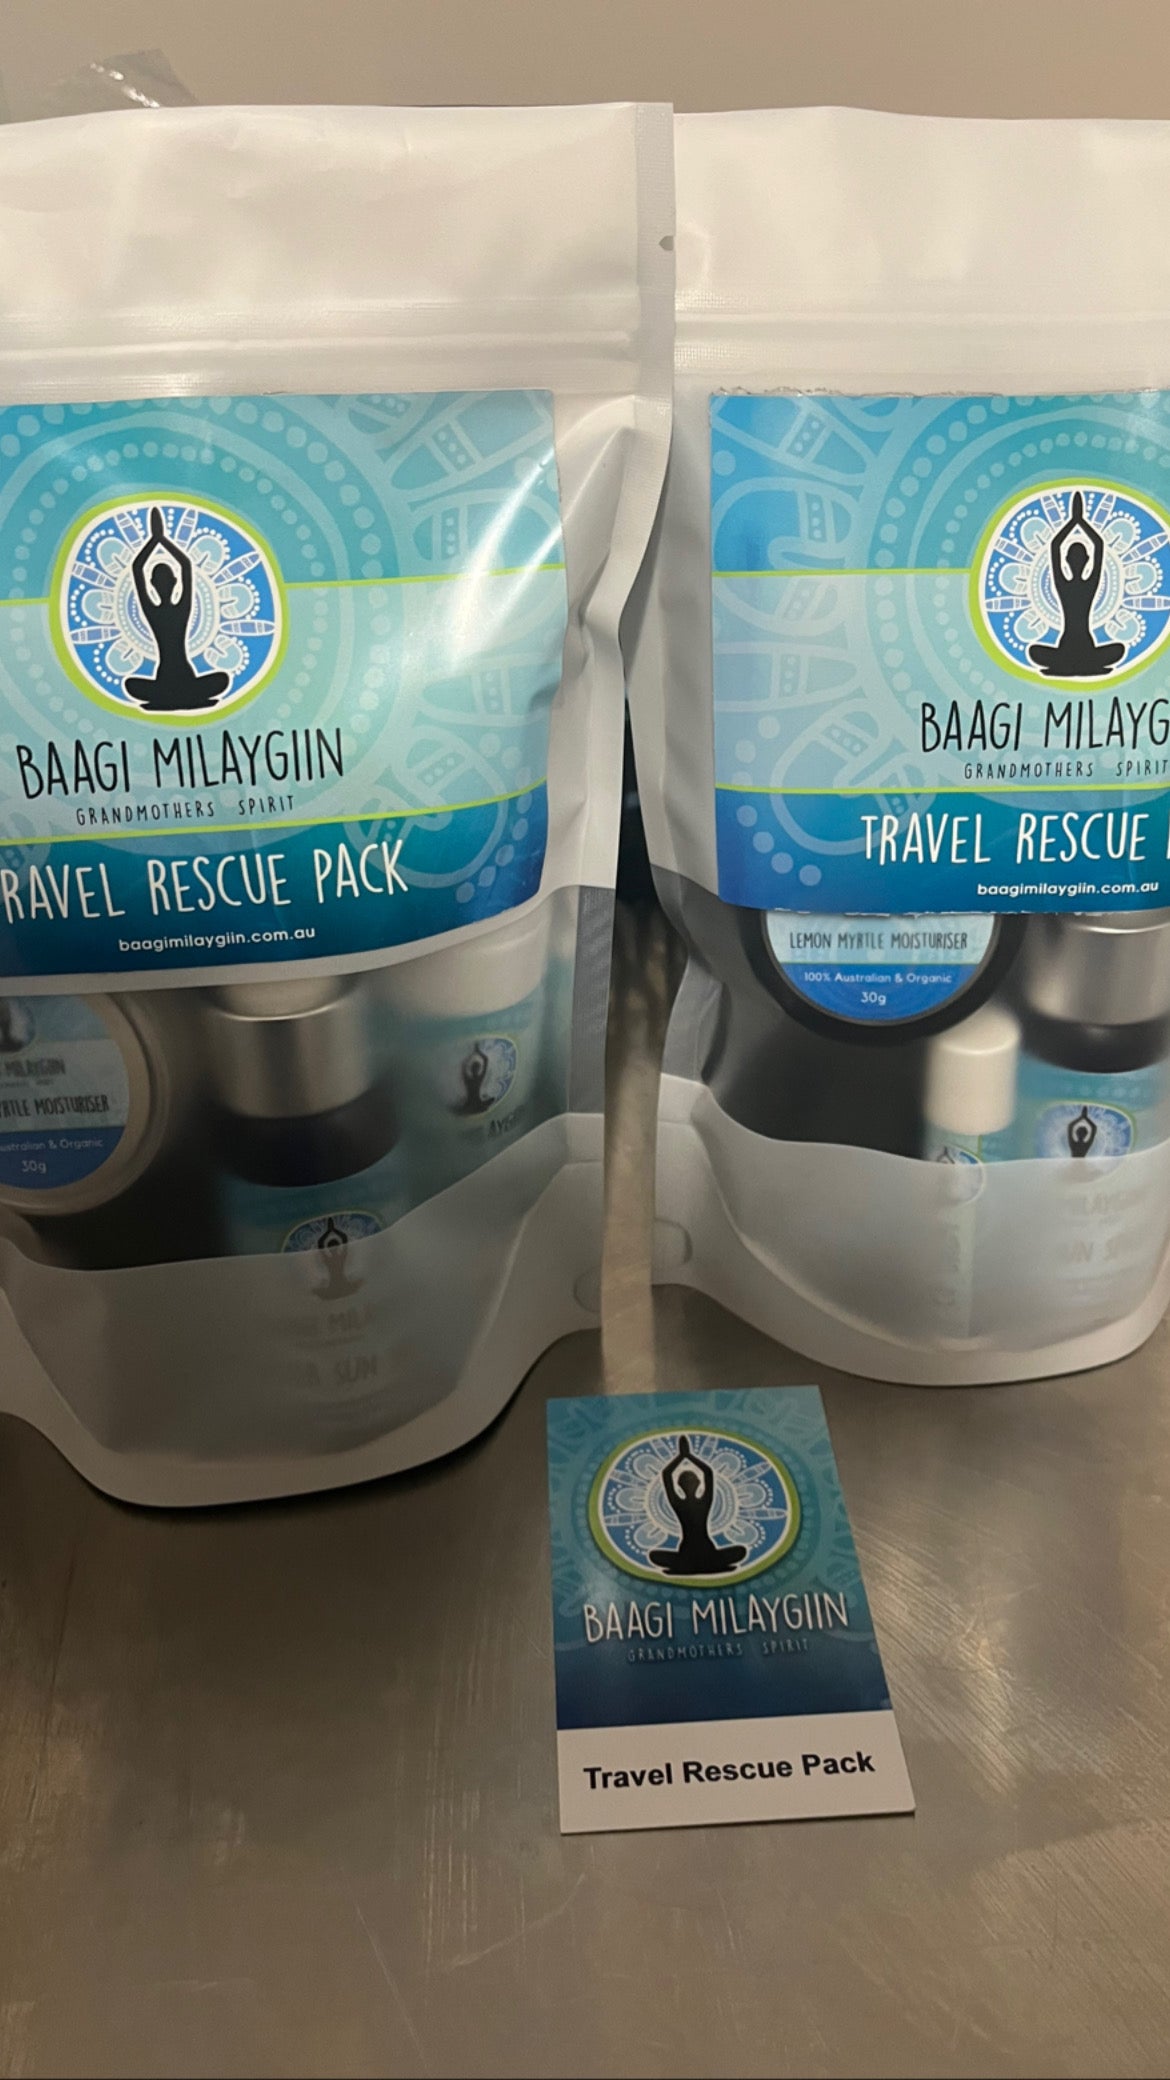 Travel Rescue Pack